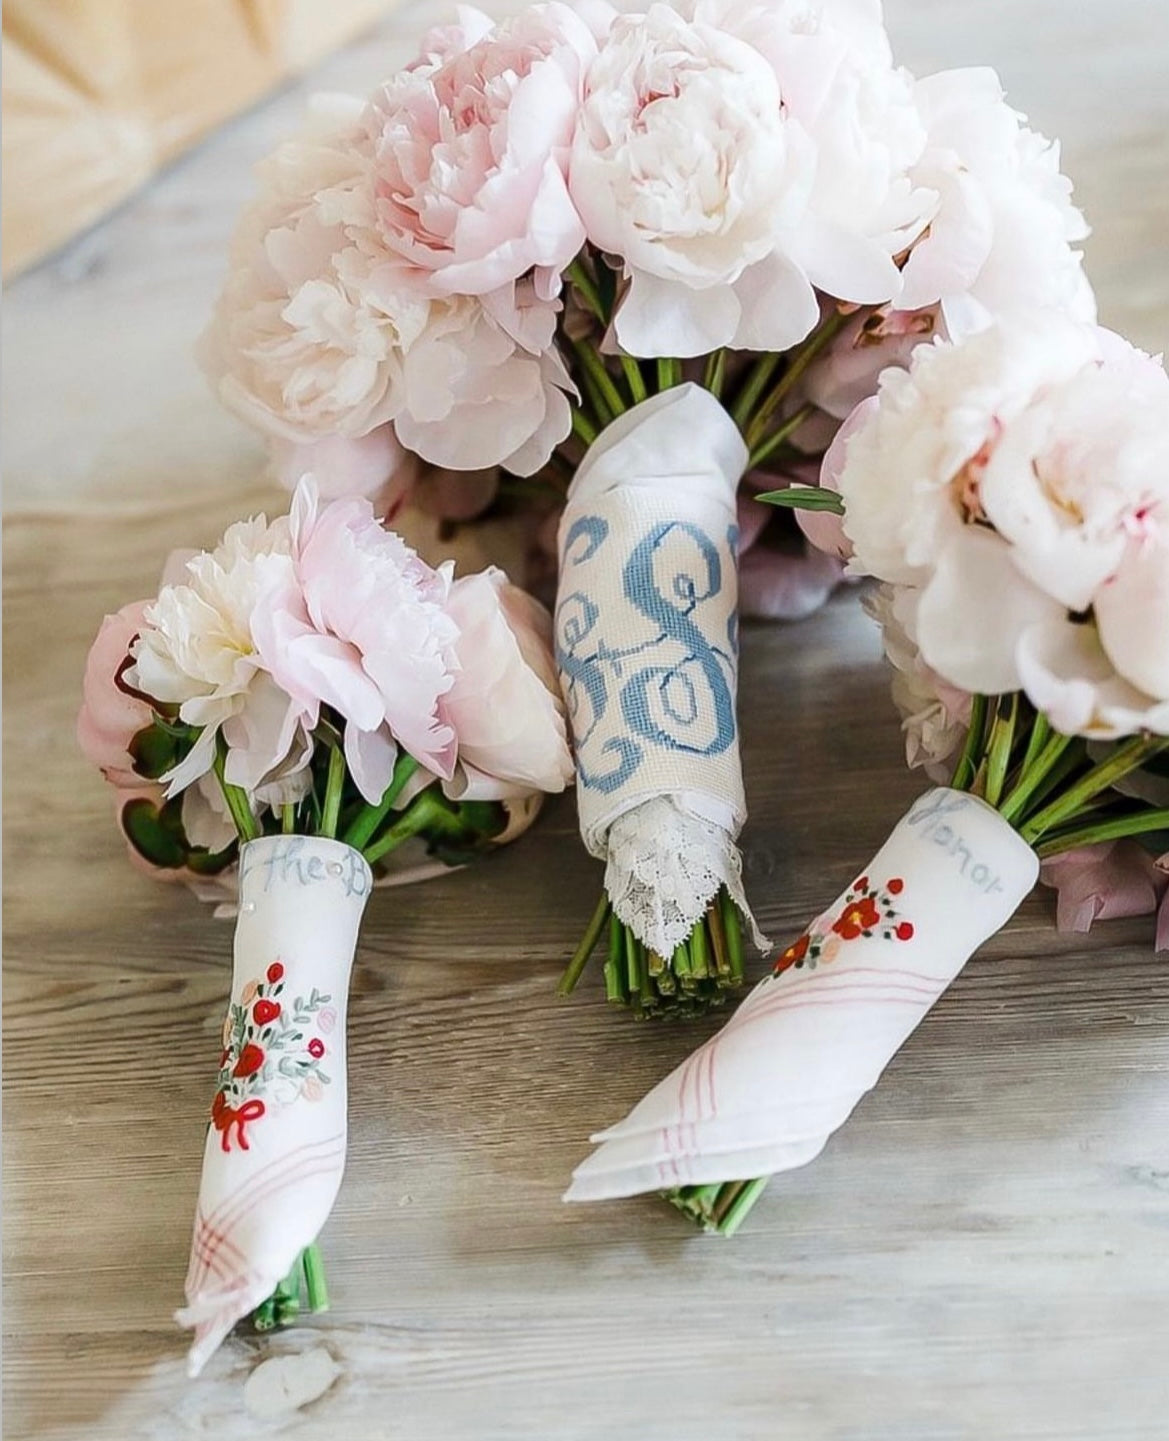 5 Ways to Add Personal Touches to Your Big Day